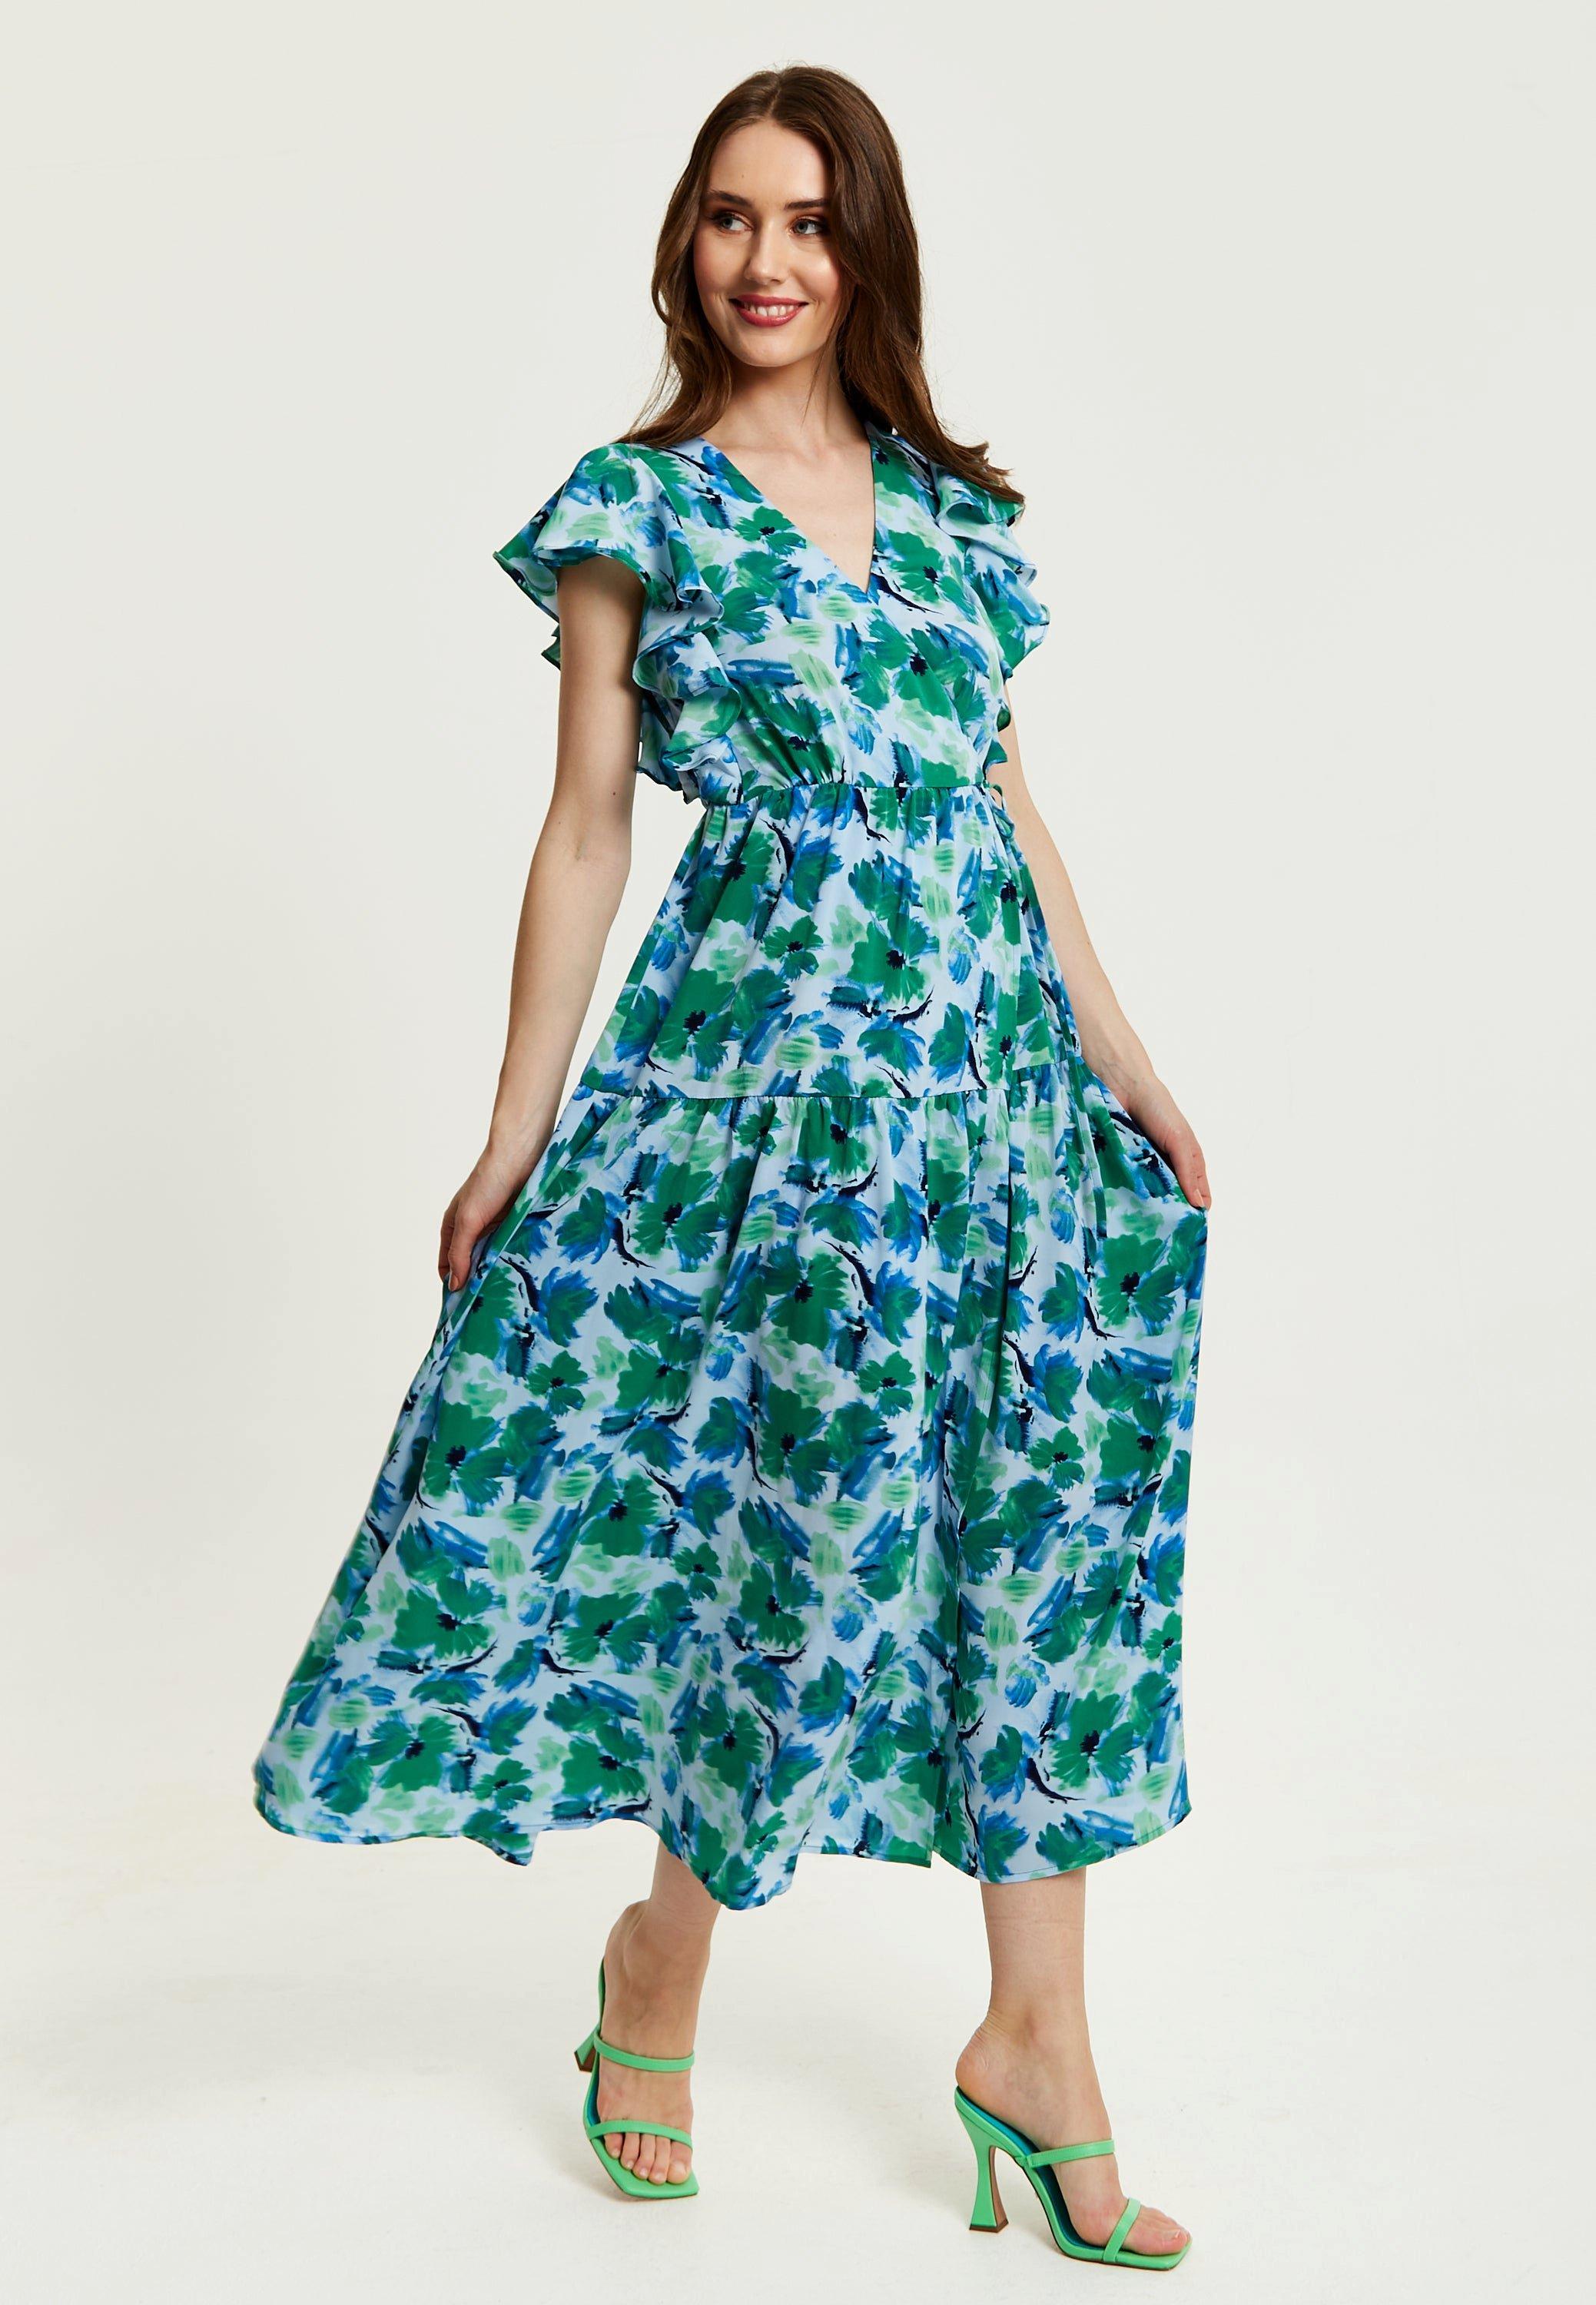 Floral Maxi Wrap Dress In Green And Blue